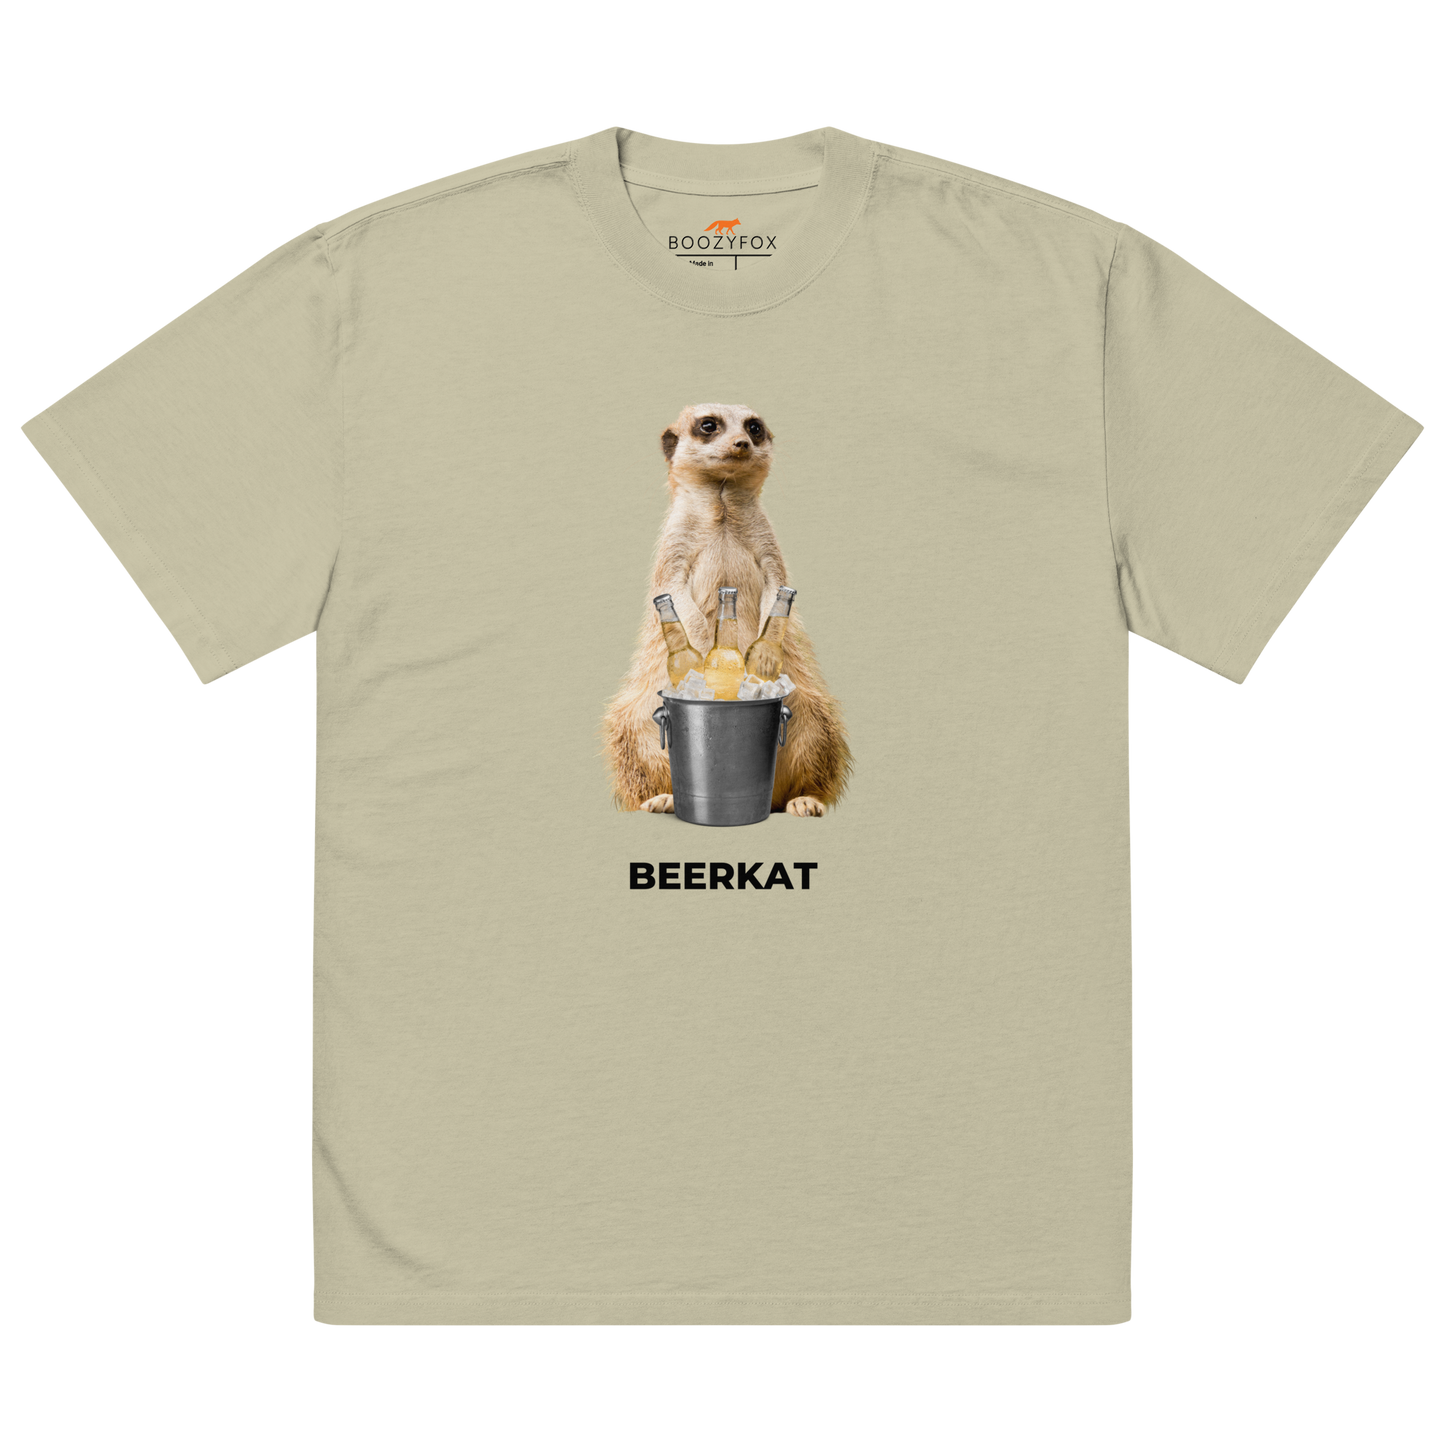 Faded Eucalyptus Meerkat Oversized T-Shirt featuring a hilarious Beerkat graphic on the chest - Funny Graphic Meerkat Oversized Tees - Boozy Fox